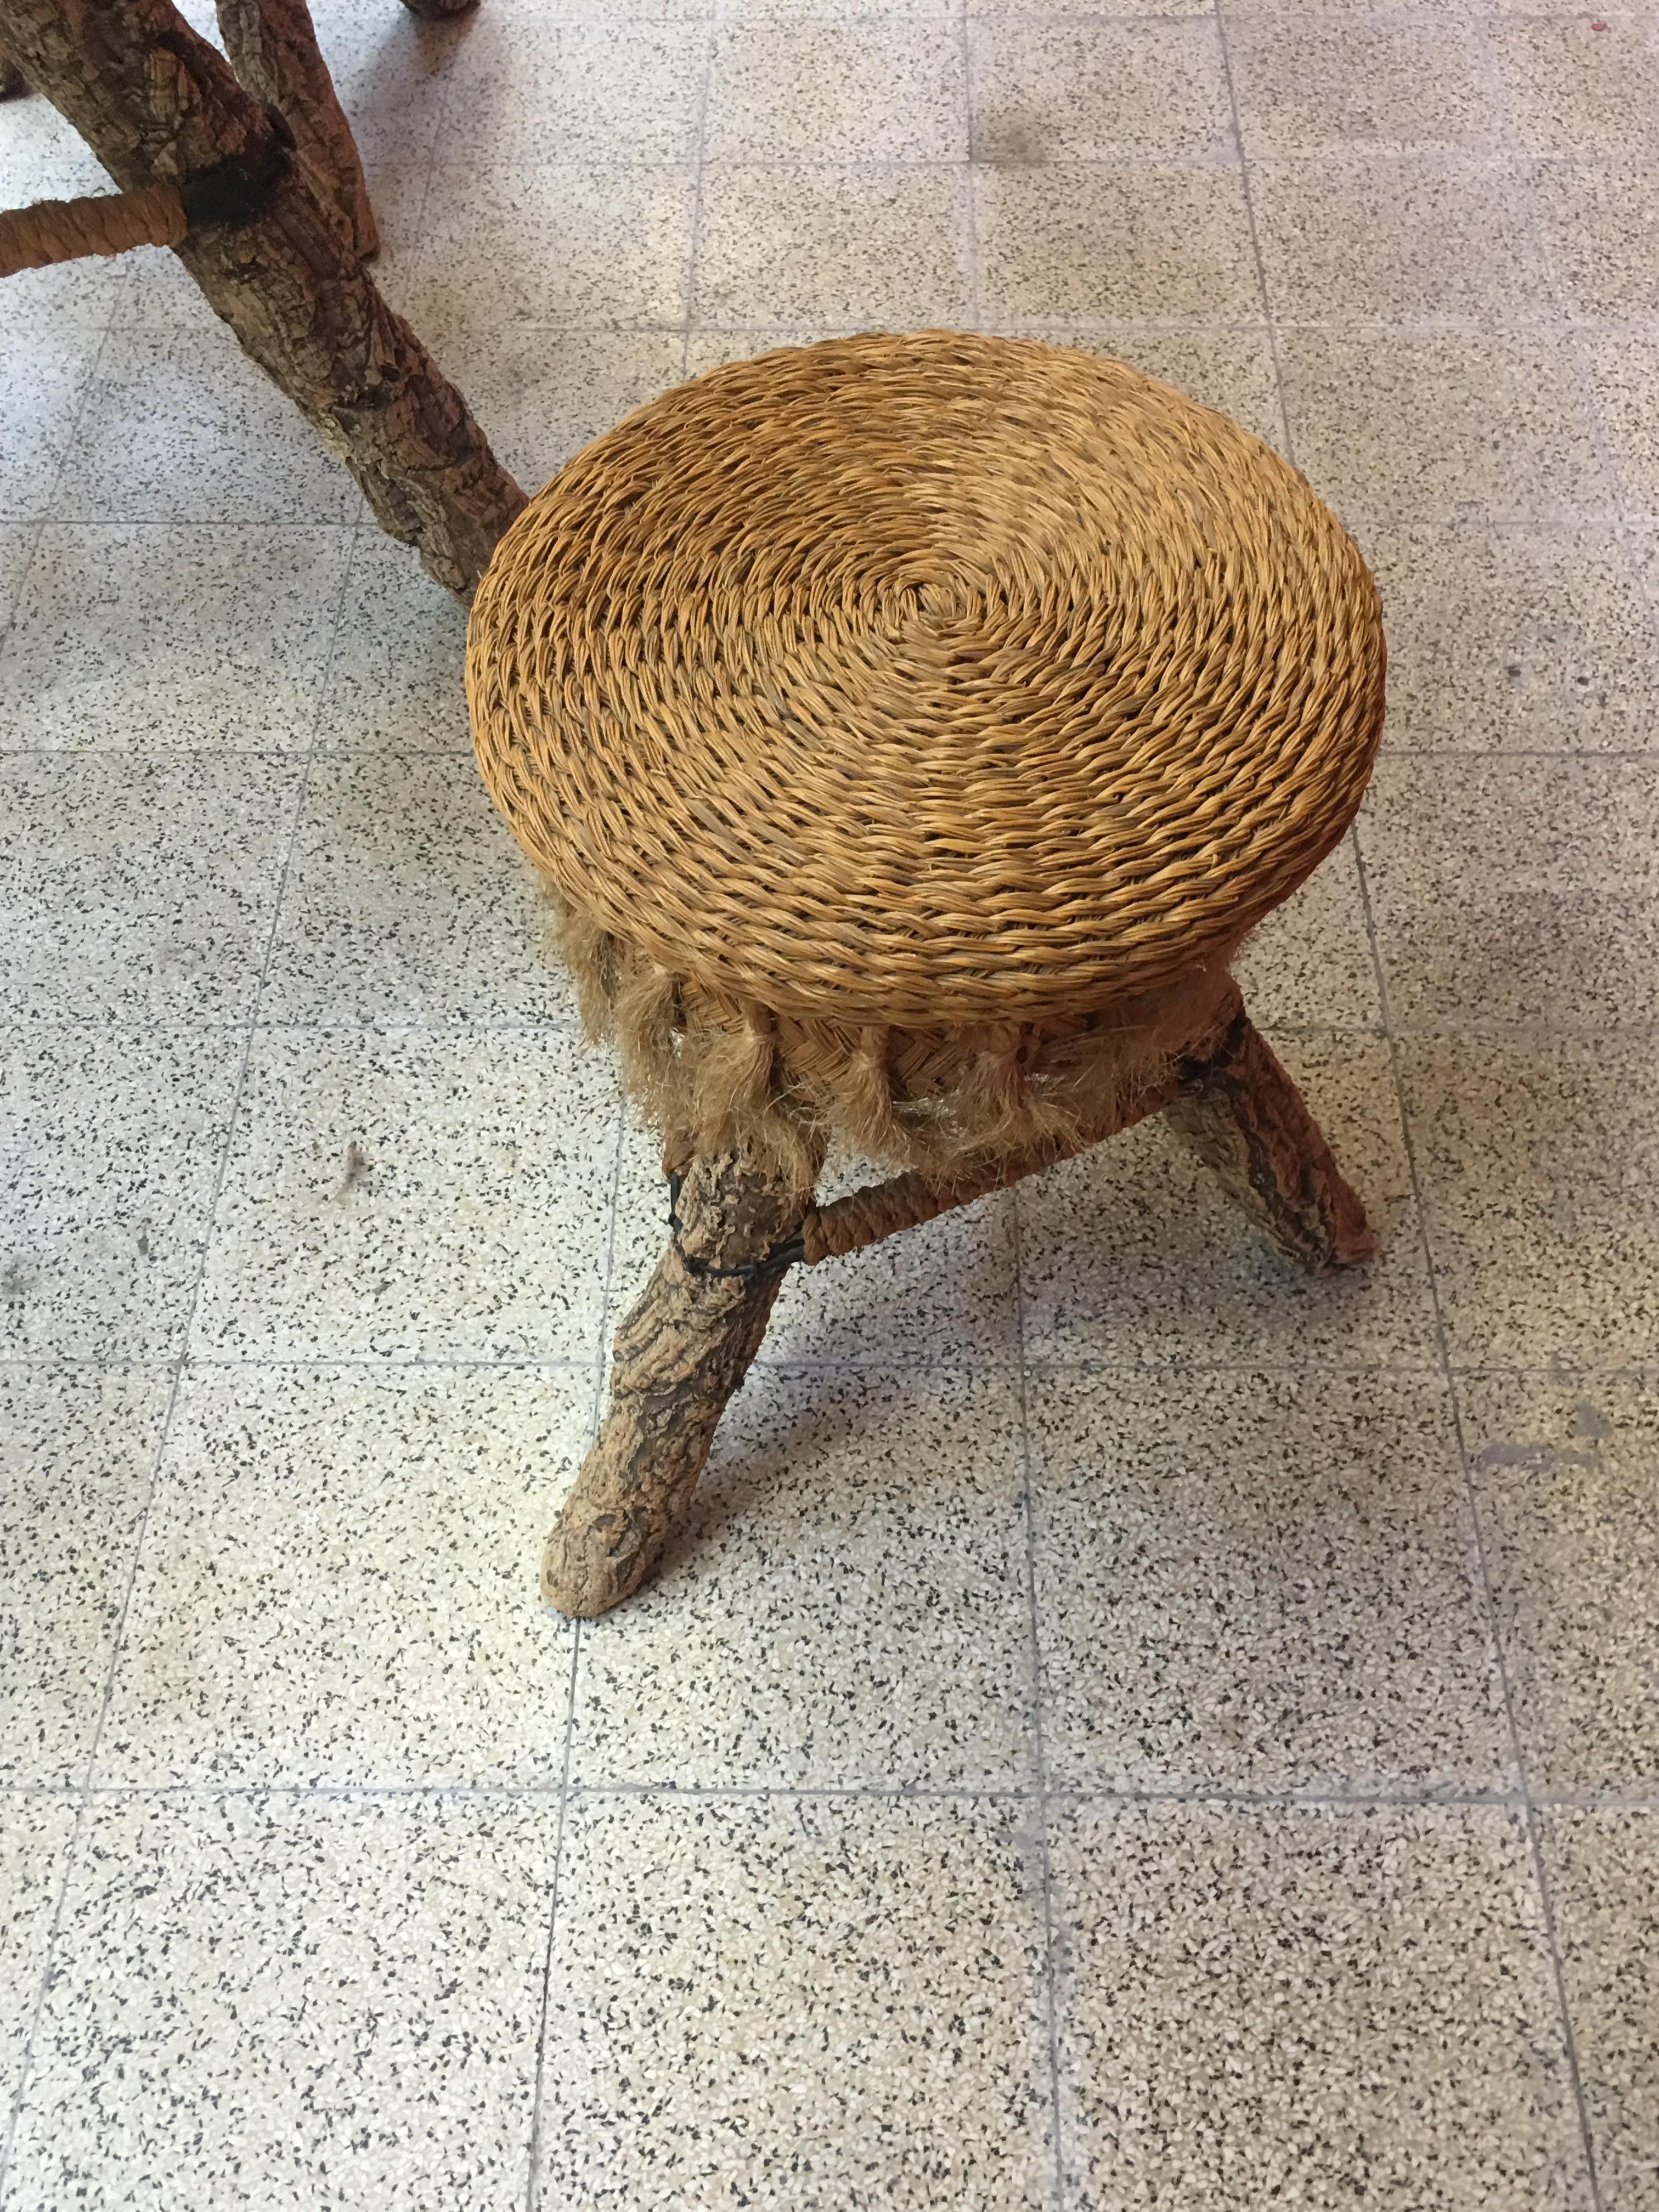 Organic Table and Its 4 Stools, Rattan, Rafia, Rope and Branches, circa 1970 For Sale 8